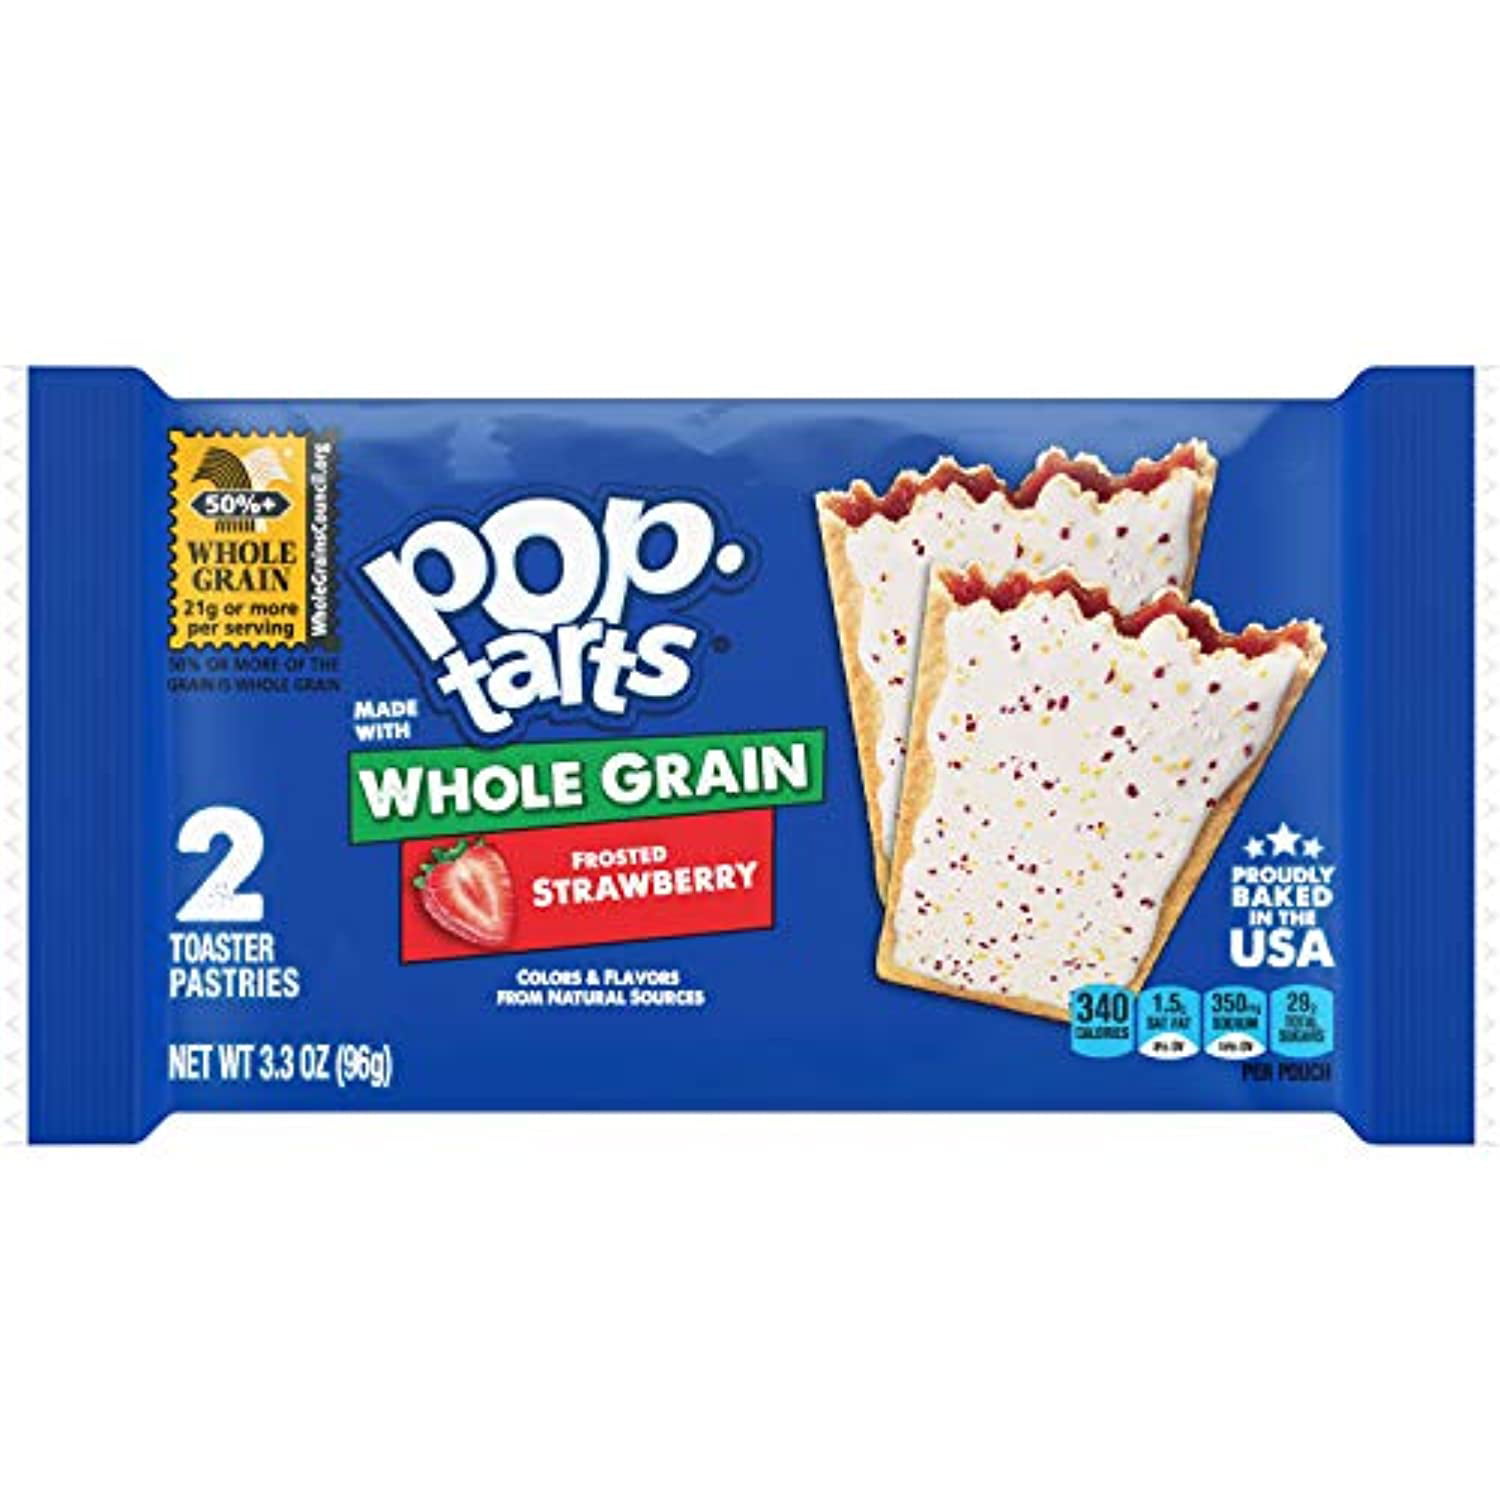 Pop-Tarts Made with Whole Grain, Frosted Strawberry, 21.1oz (72 Count)